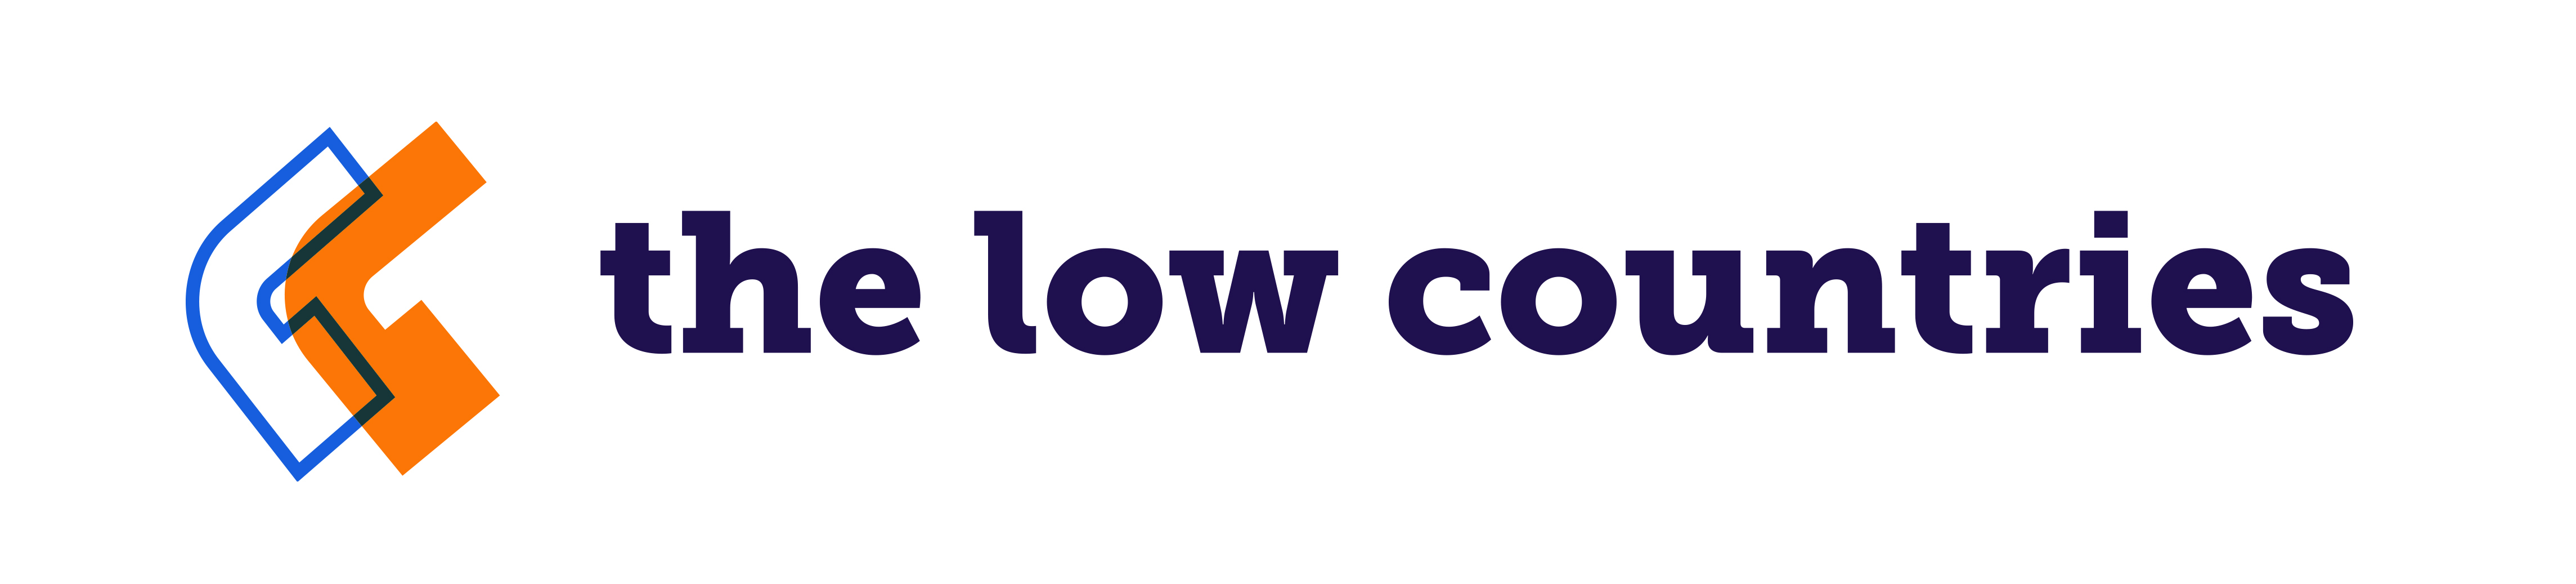 Logo the low countries